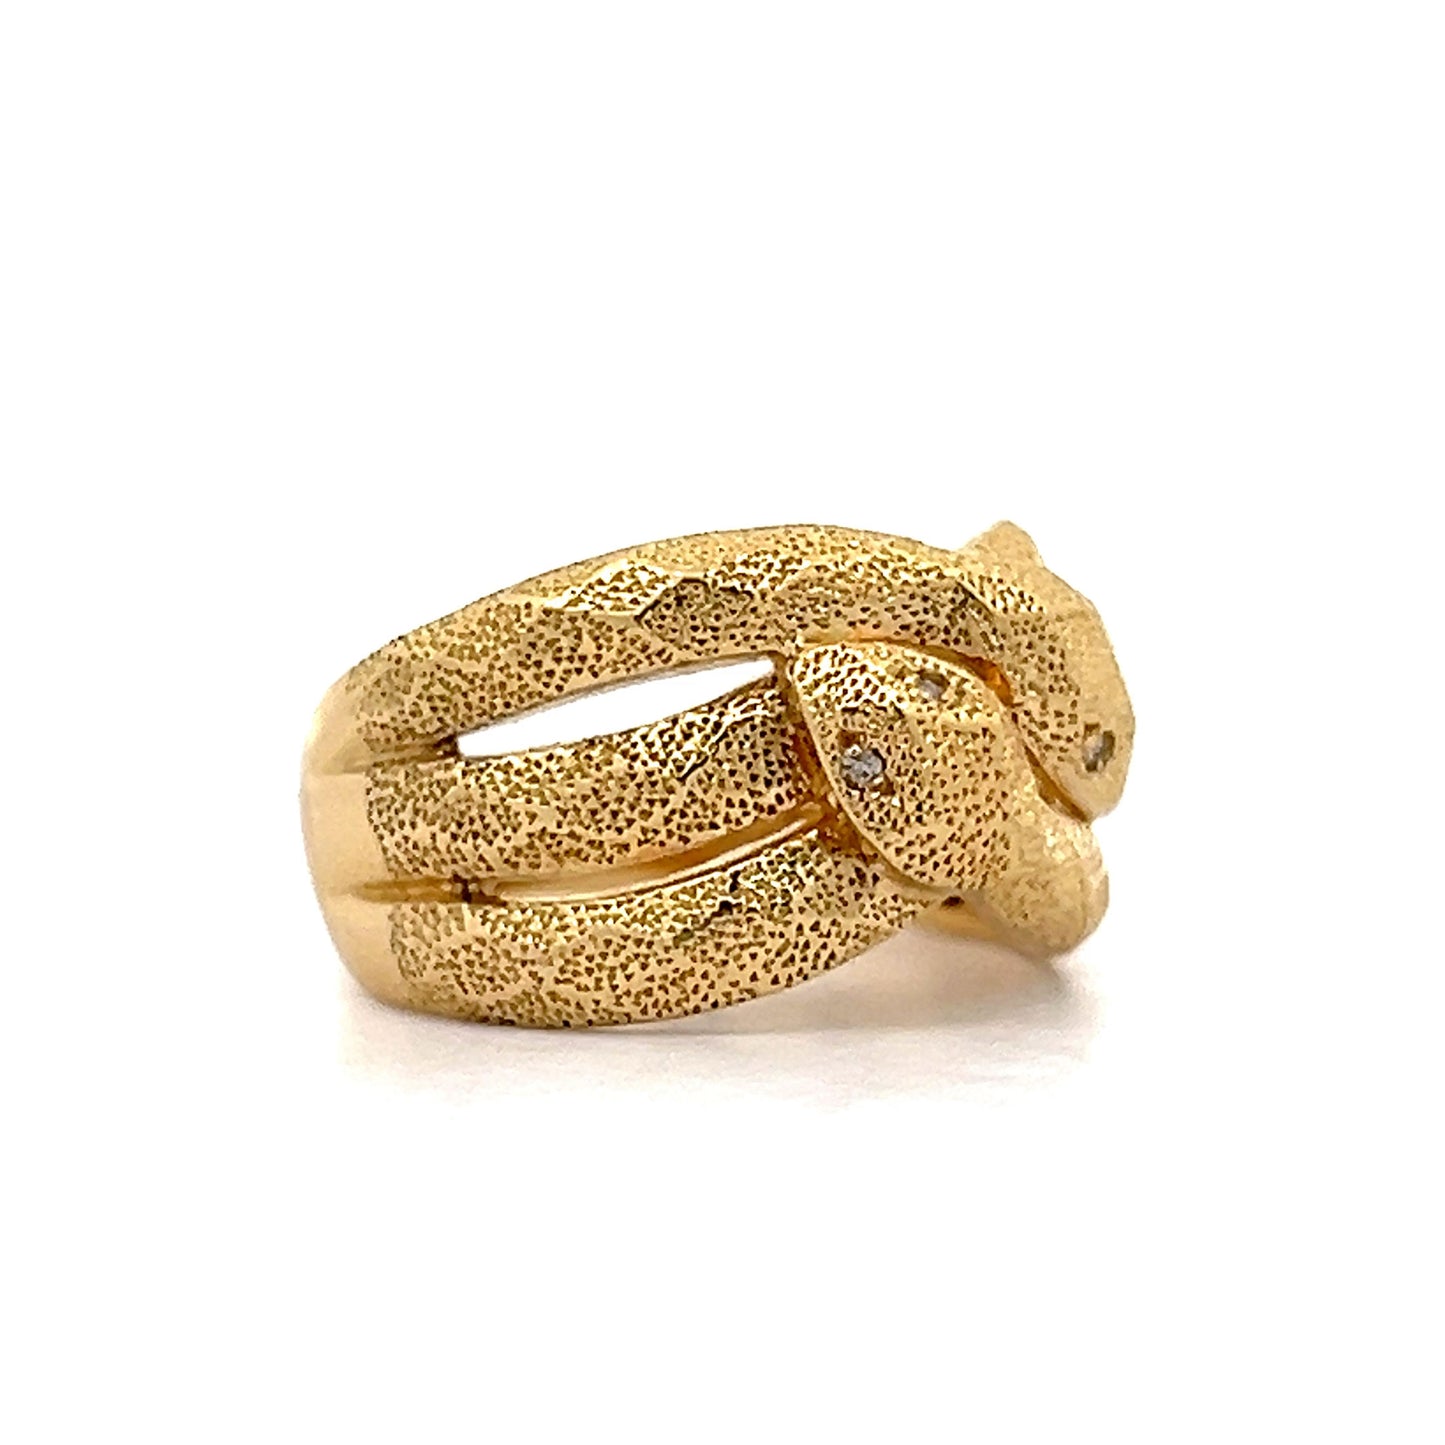 Vintage Double Headed Snake Ring in 18k Yellow Gold